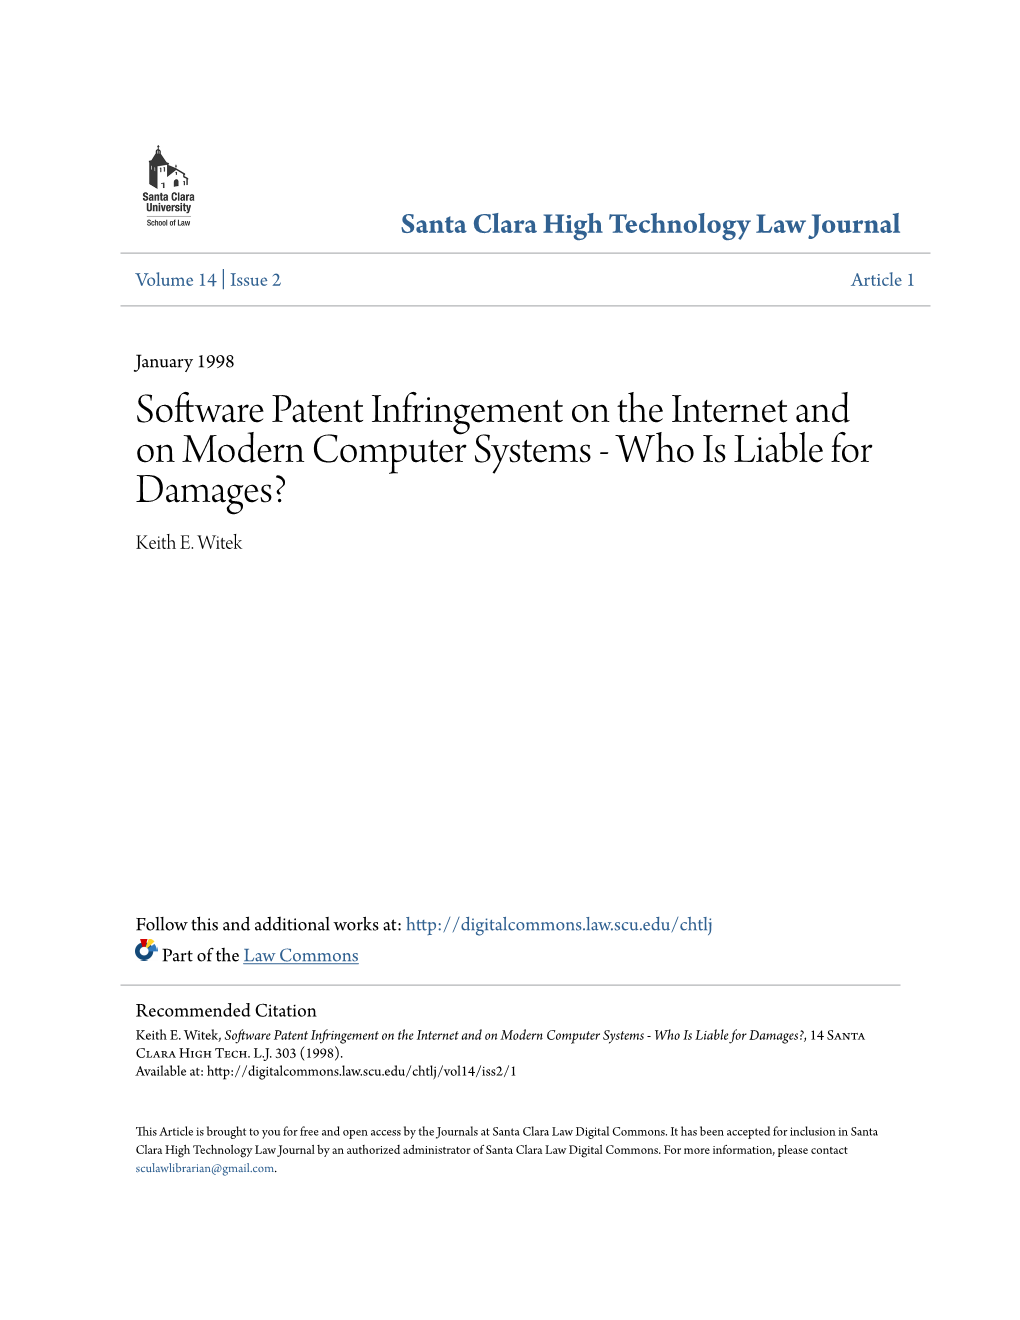 Software Patent Infringement on the Internet and on Modern Computer Systems - Who Is Liable for Damages? Keith E